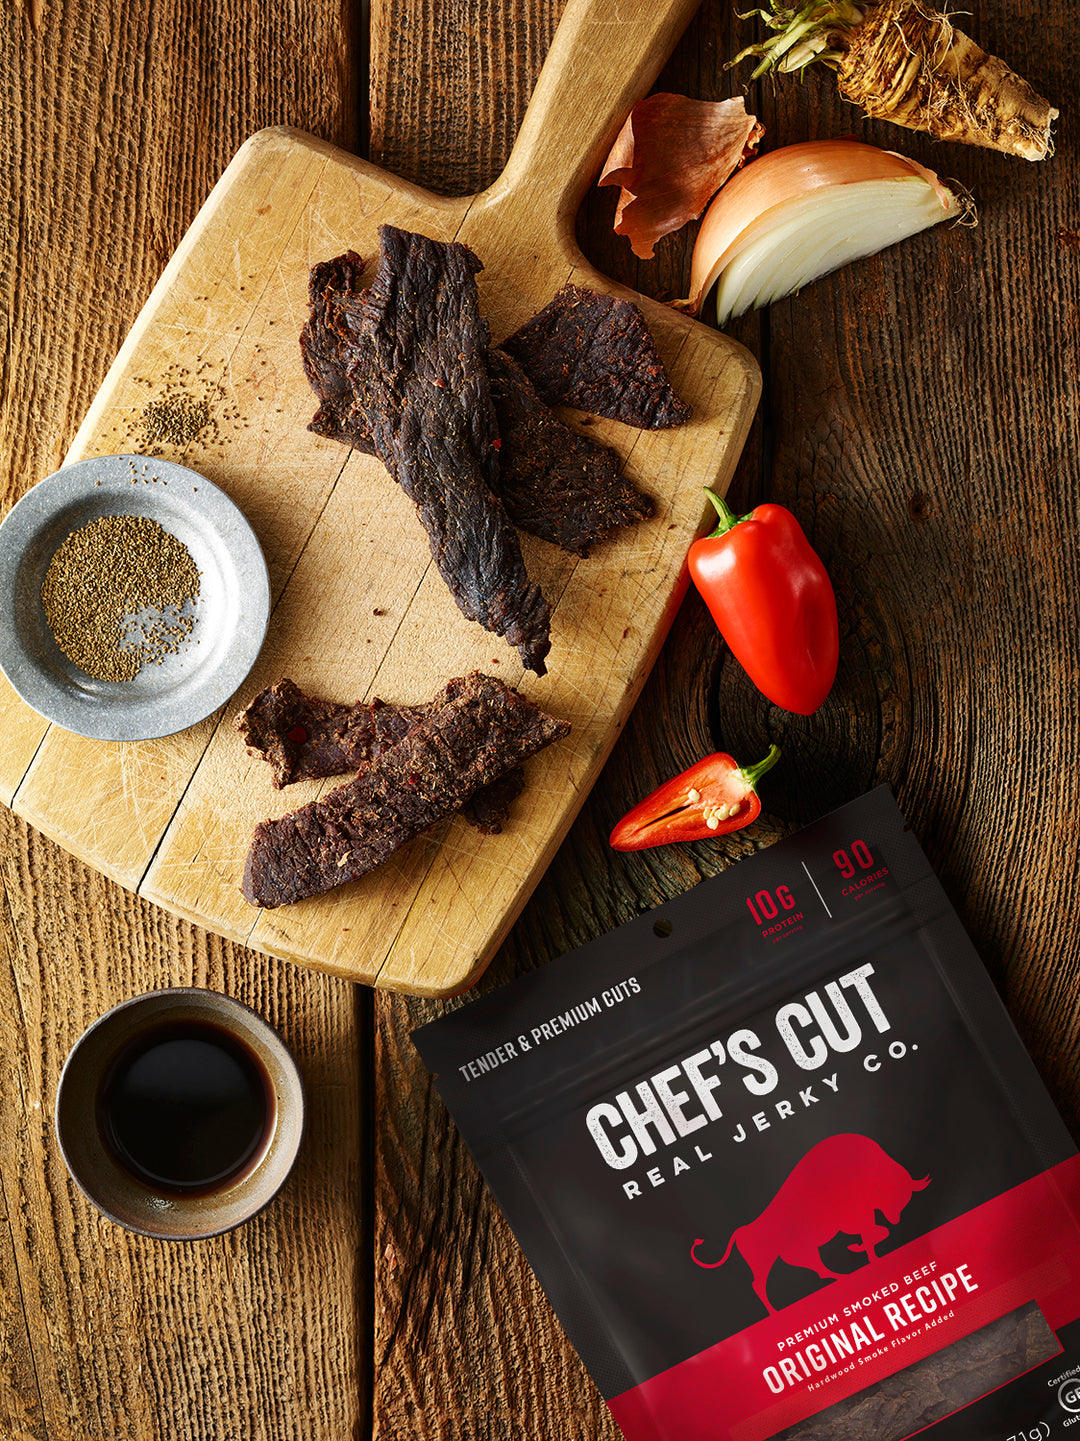 Chef's Cut Real Jerky Co. Smoked Beef Original Recipe-2.5 oz.-8/Case